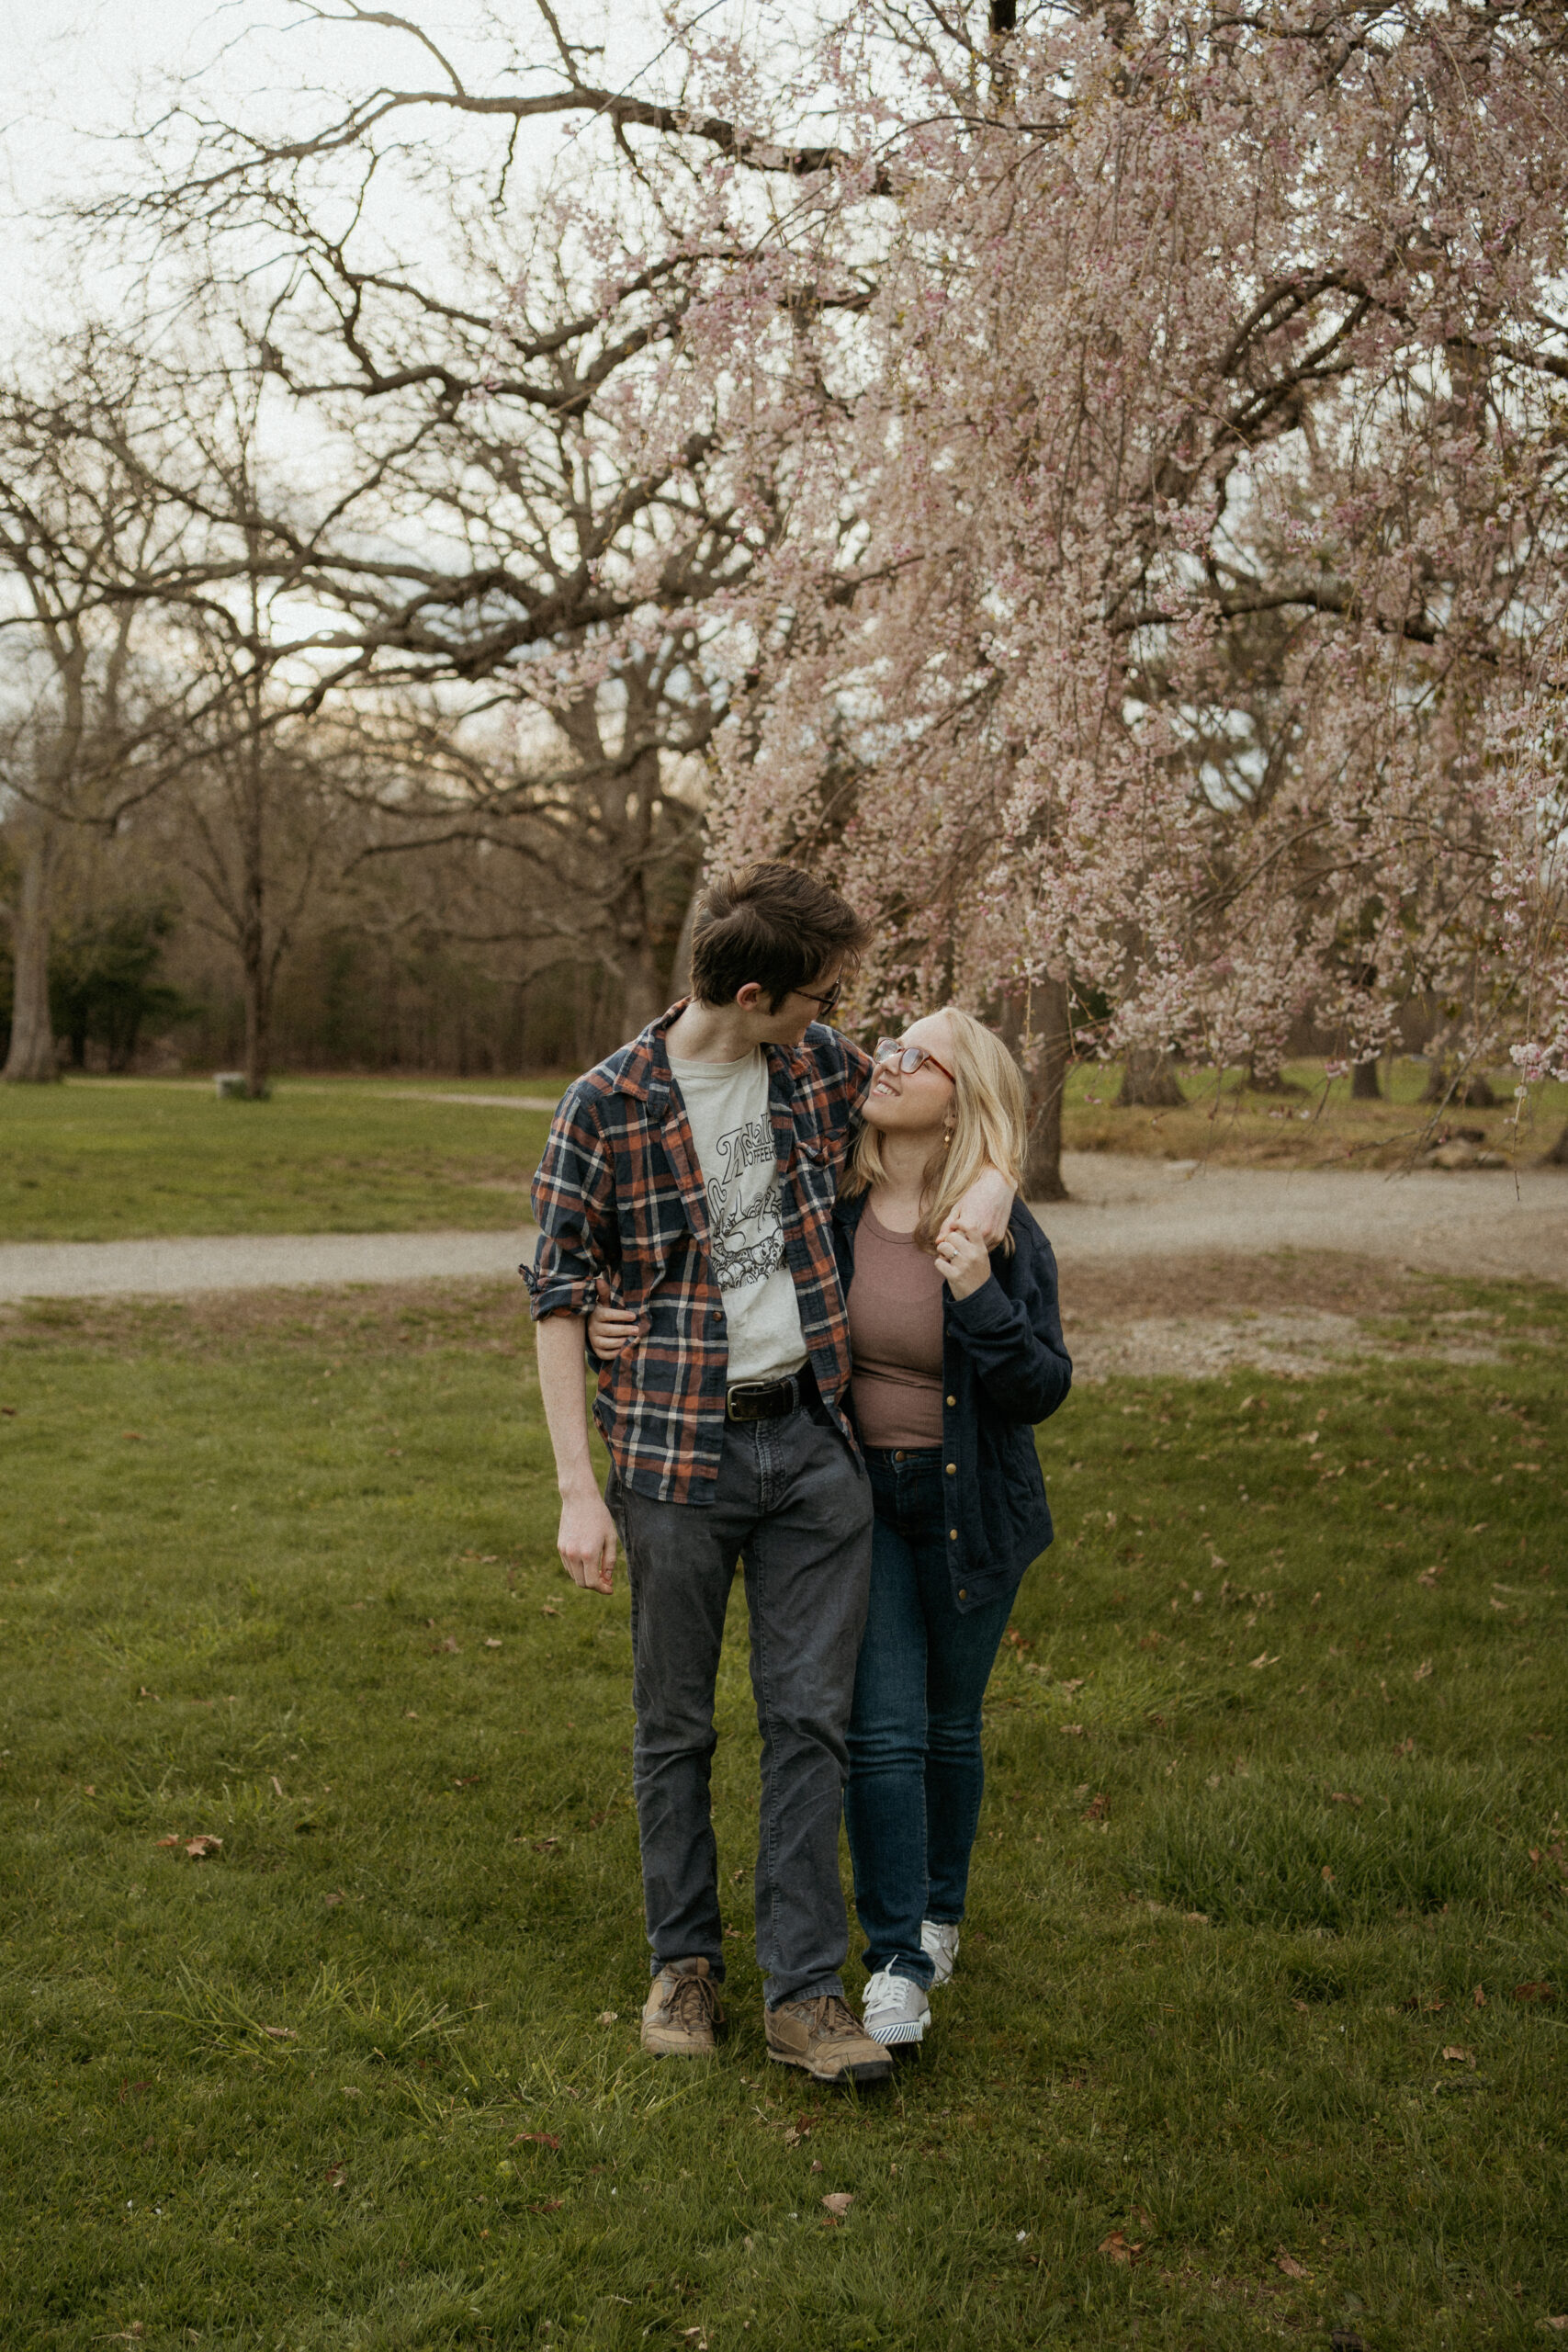 Engaged couple walks side by side, exchanging affectionate glances and smiles during their spring engagement photo session at Borderland State Park in Easton, MA